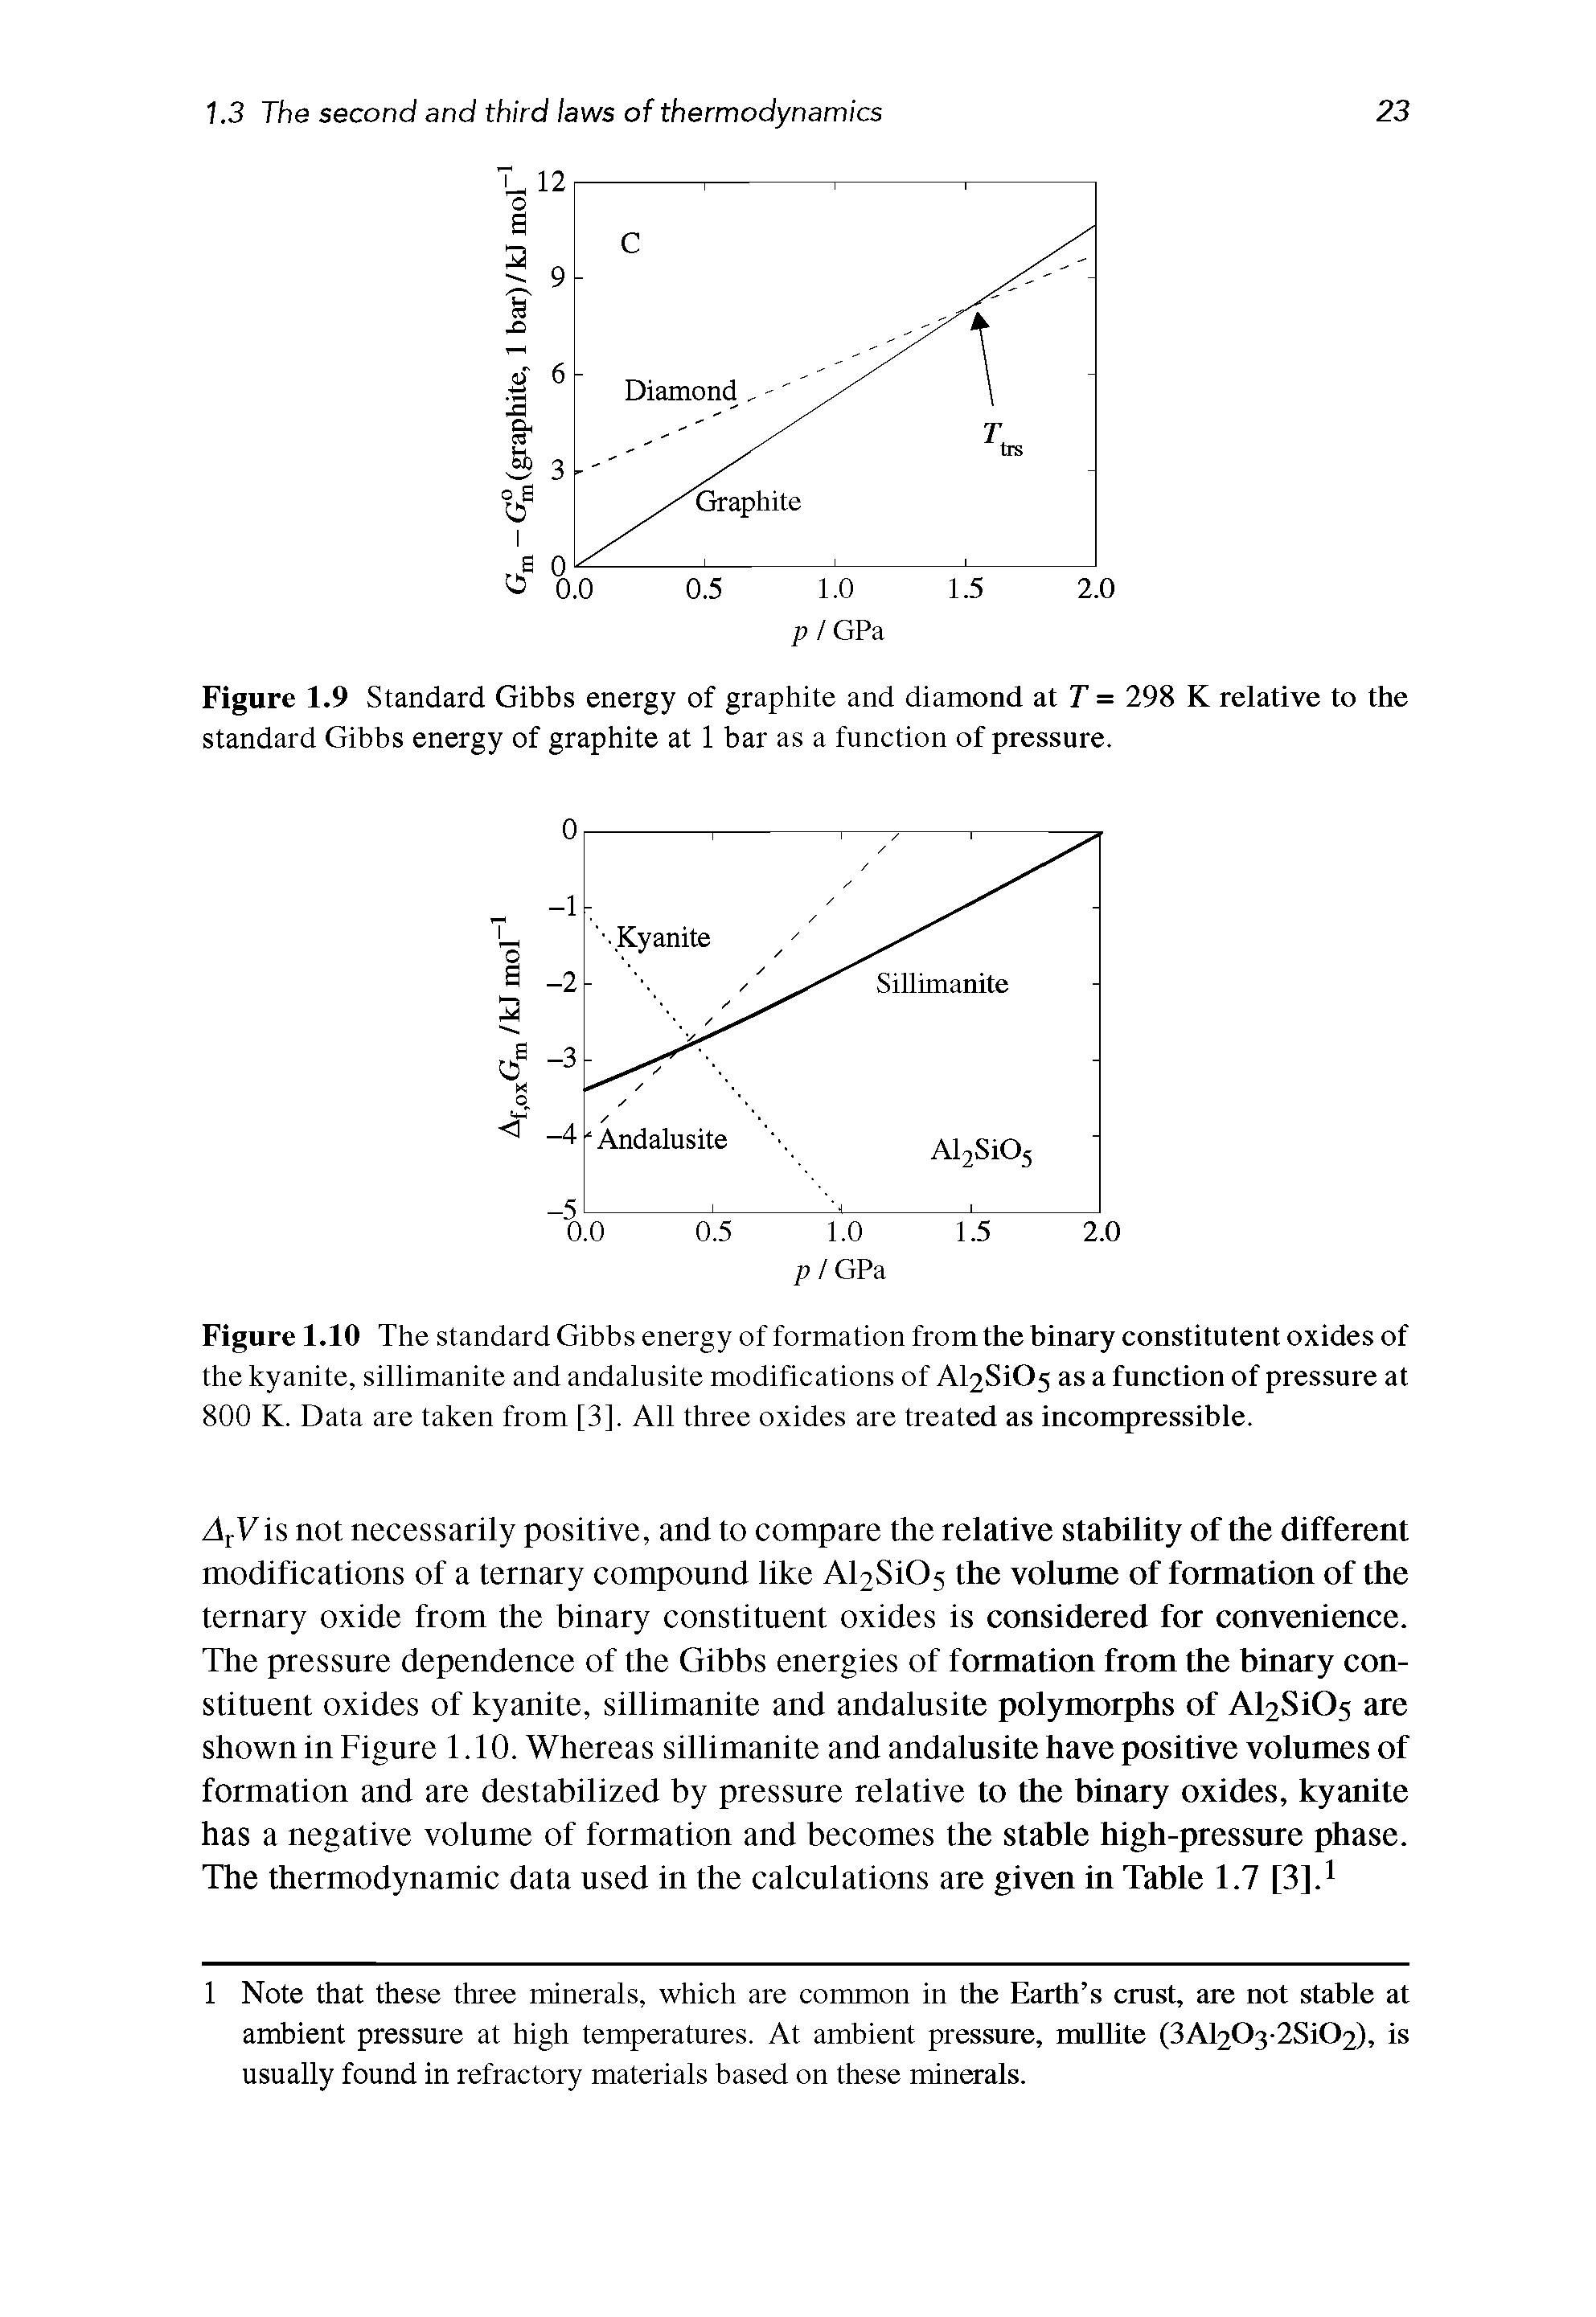 Figure 1.9 Standard Gibbs energy of graphite and diamond at T = 298 K relative to the standard Gibbs energy of graphite at 1 bar as a function of pressure.